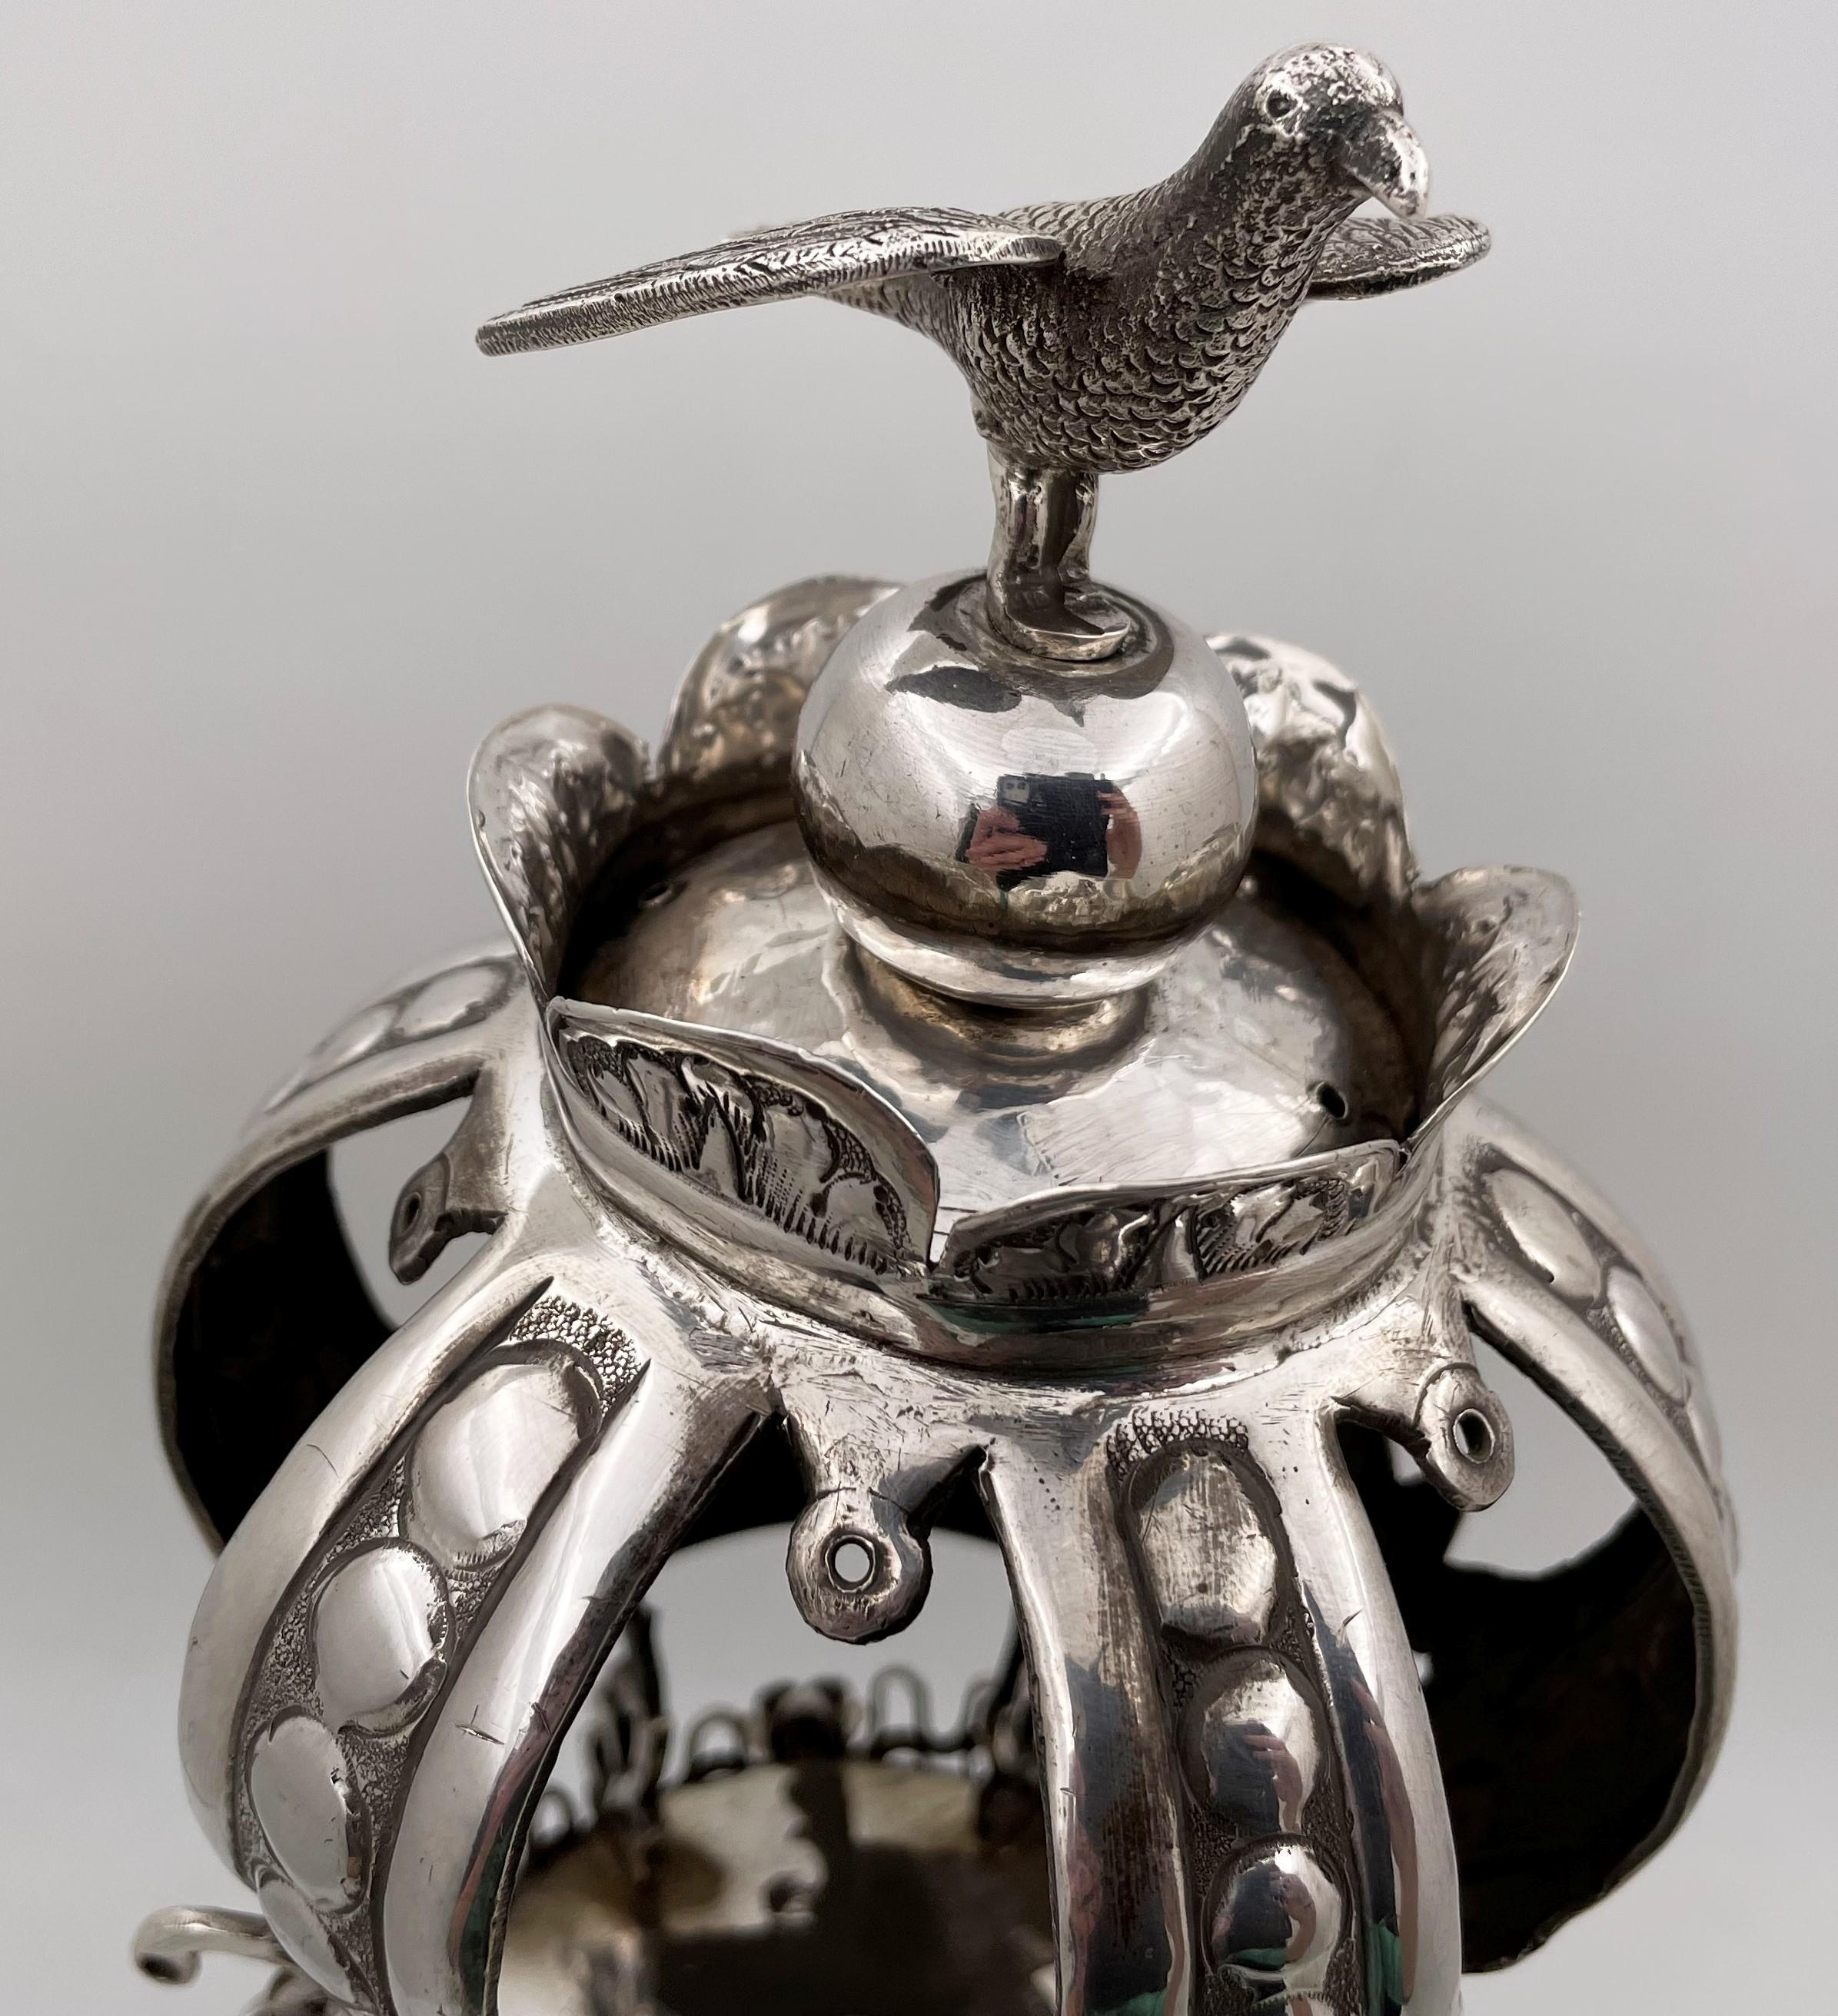 Russian, sterling silver Torah crown, topped with a bird, from the turn of the century, all beautifully detailed with flowers and animal motifs, with Hebrew and English inscriptions. It measures 20 1/4'' in height by 8'' in diameter, weighs 86 troy